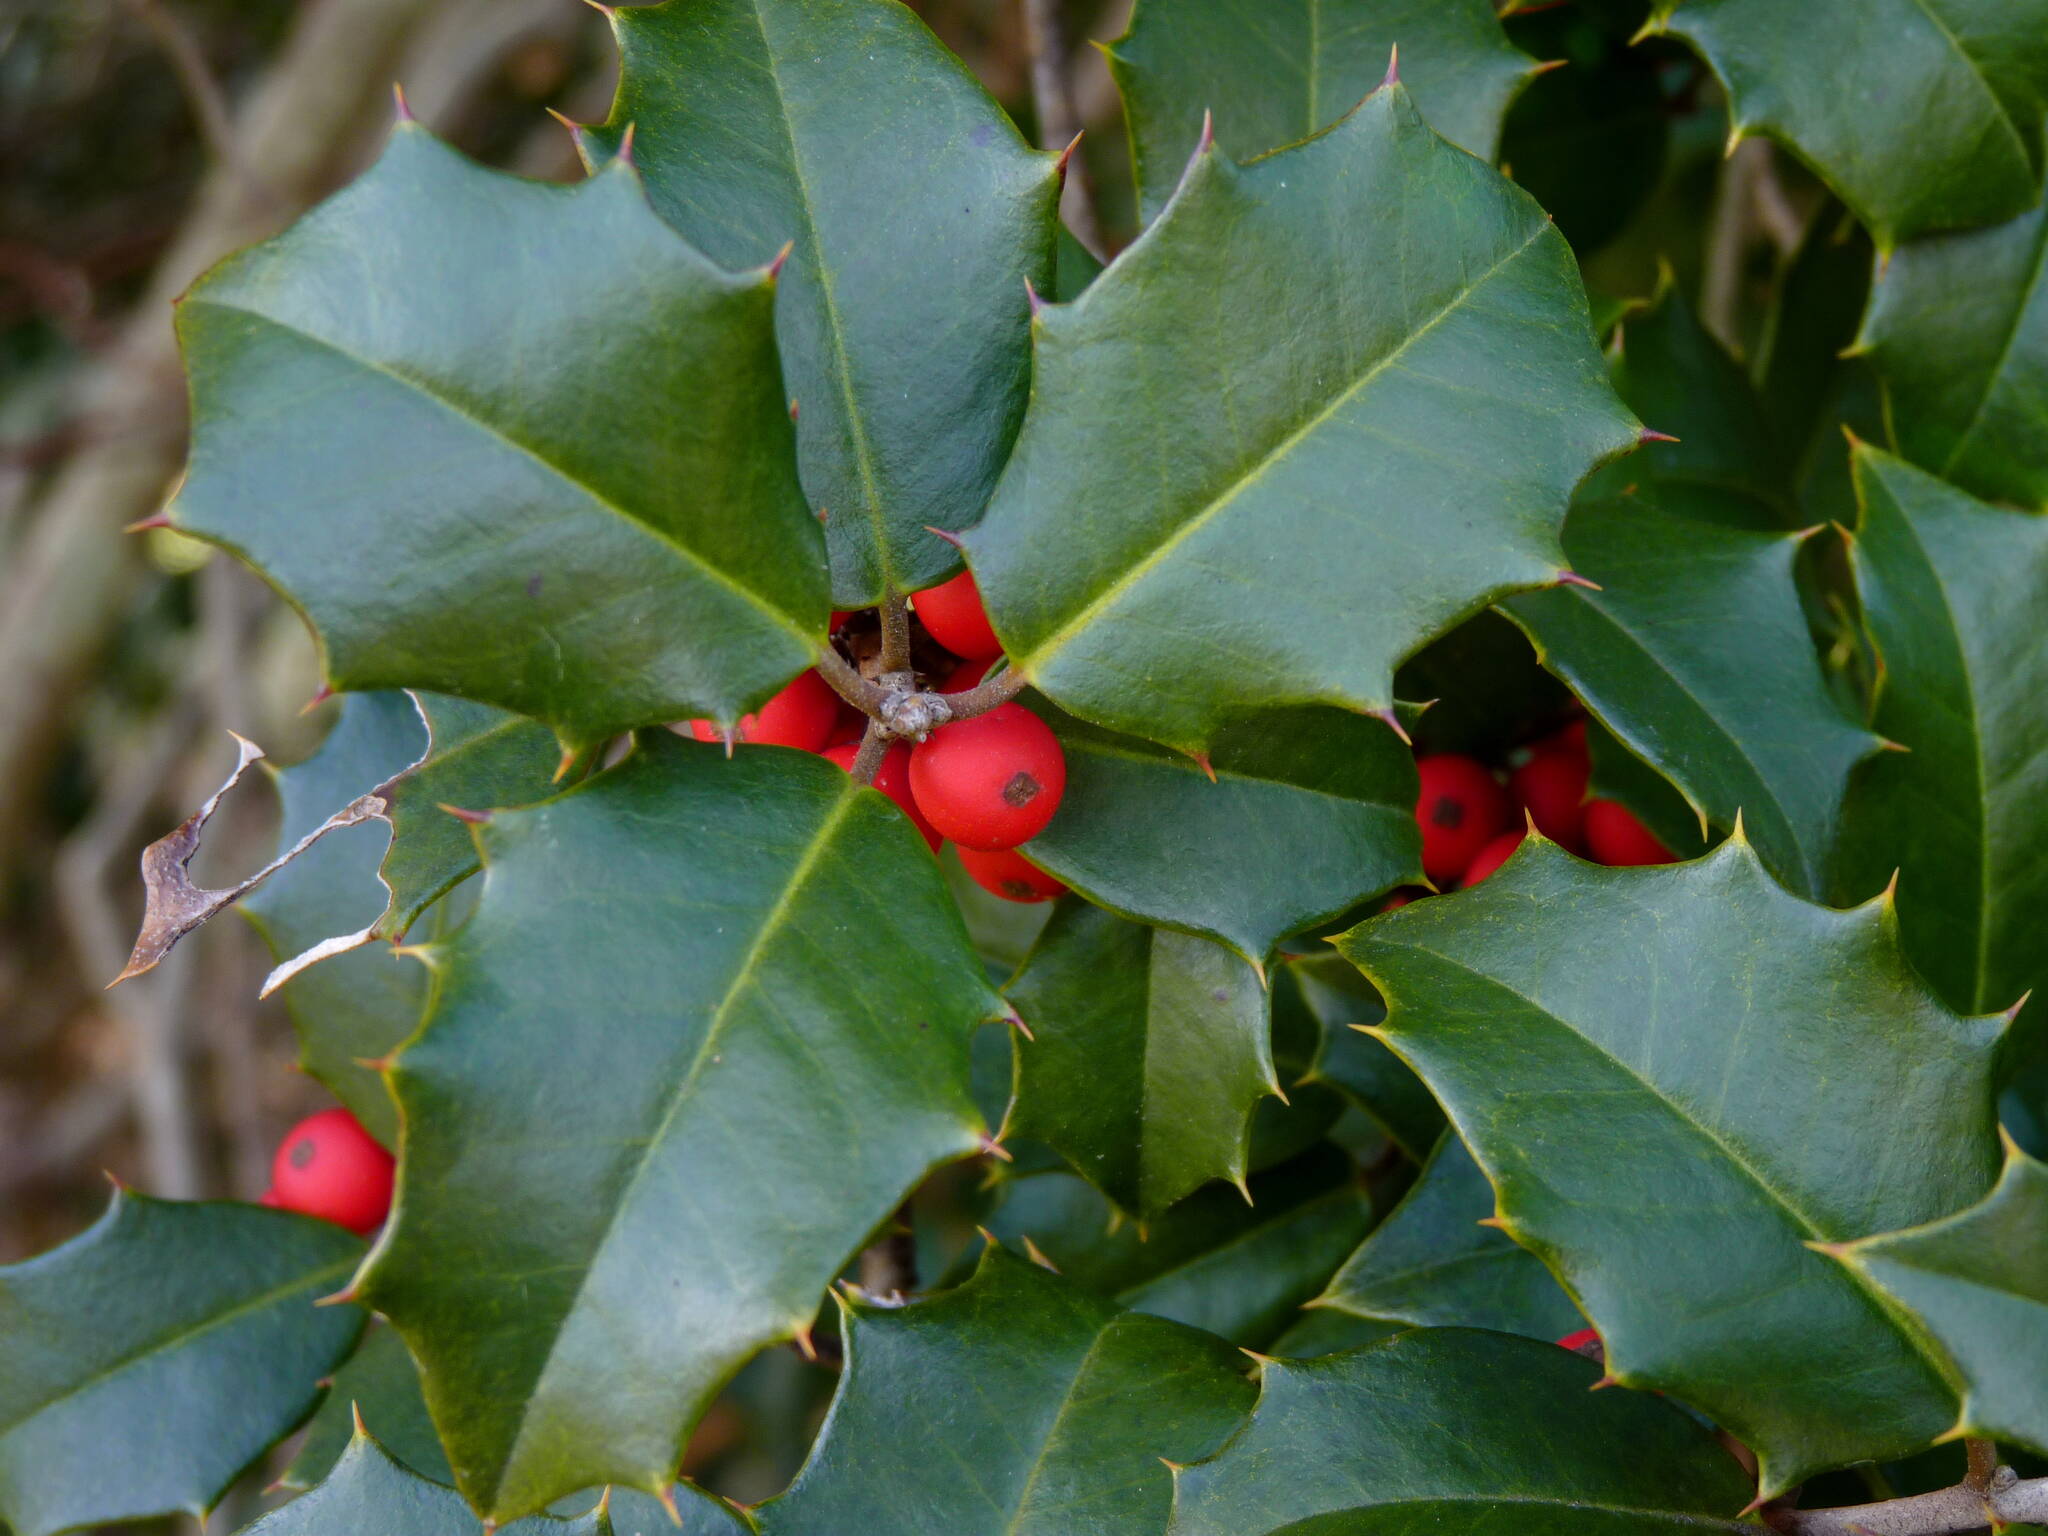 This December 2013 photo available under a Creative Commons license shows holly berries and leaves. A study of European holly in Spain showed that leaf browsing by mammals induces an increase of prickliness of the leaves. This phenomenon was apparently observed recently in Juneau. (Dendroica Cerulea / Flickr)